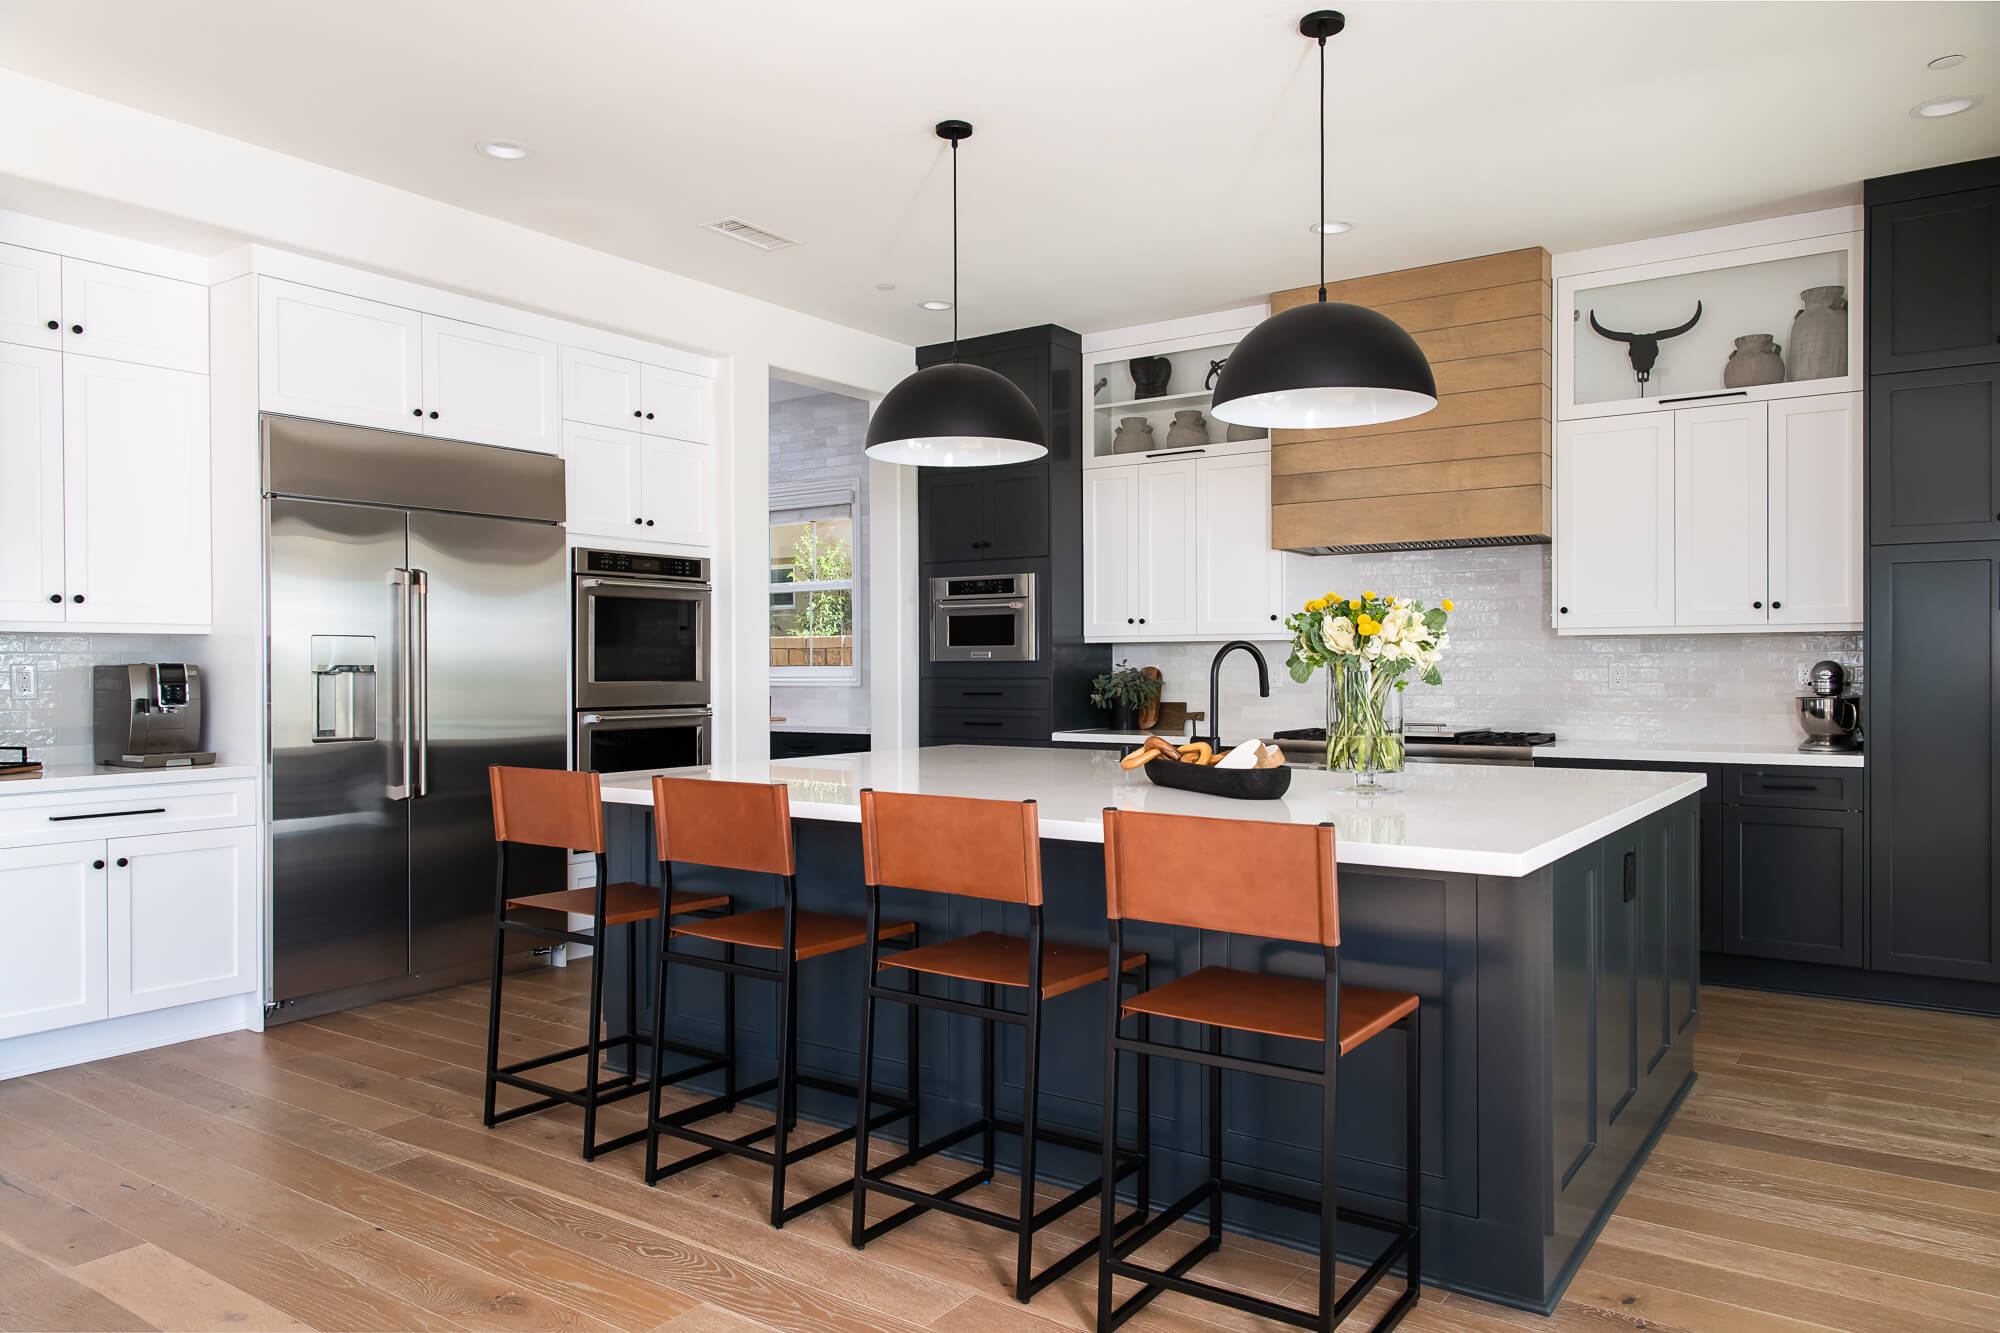 Black and White Kitchen with Black Island - Transitional - Kitchen